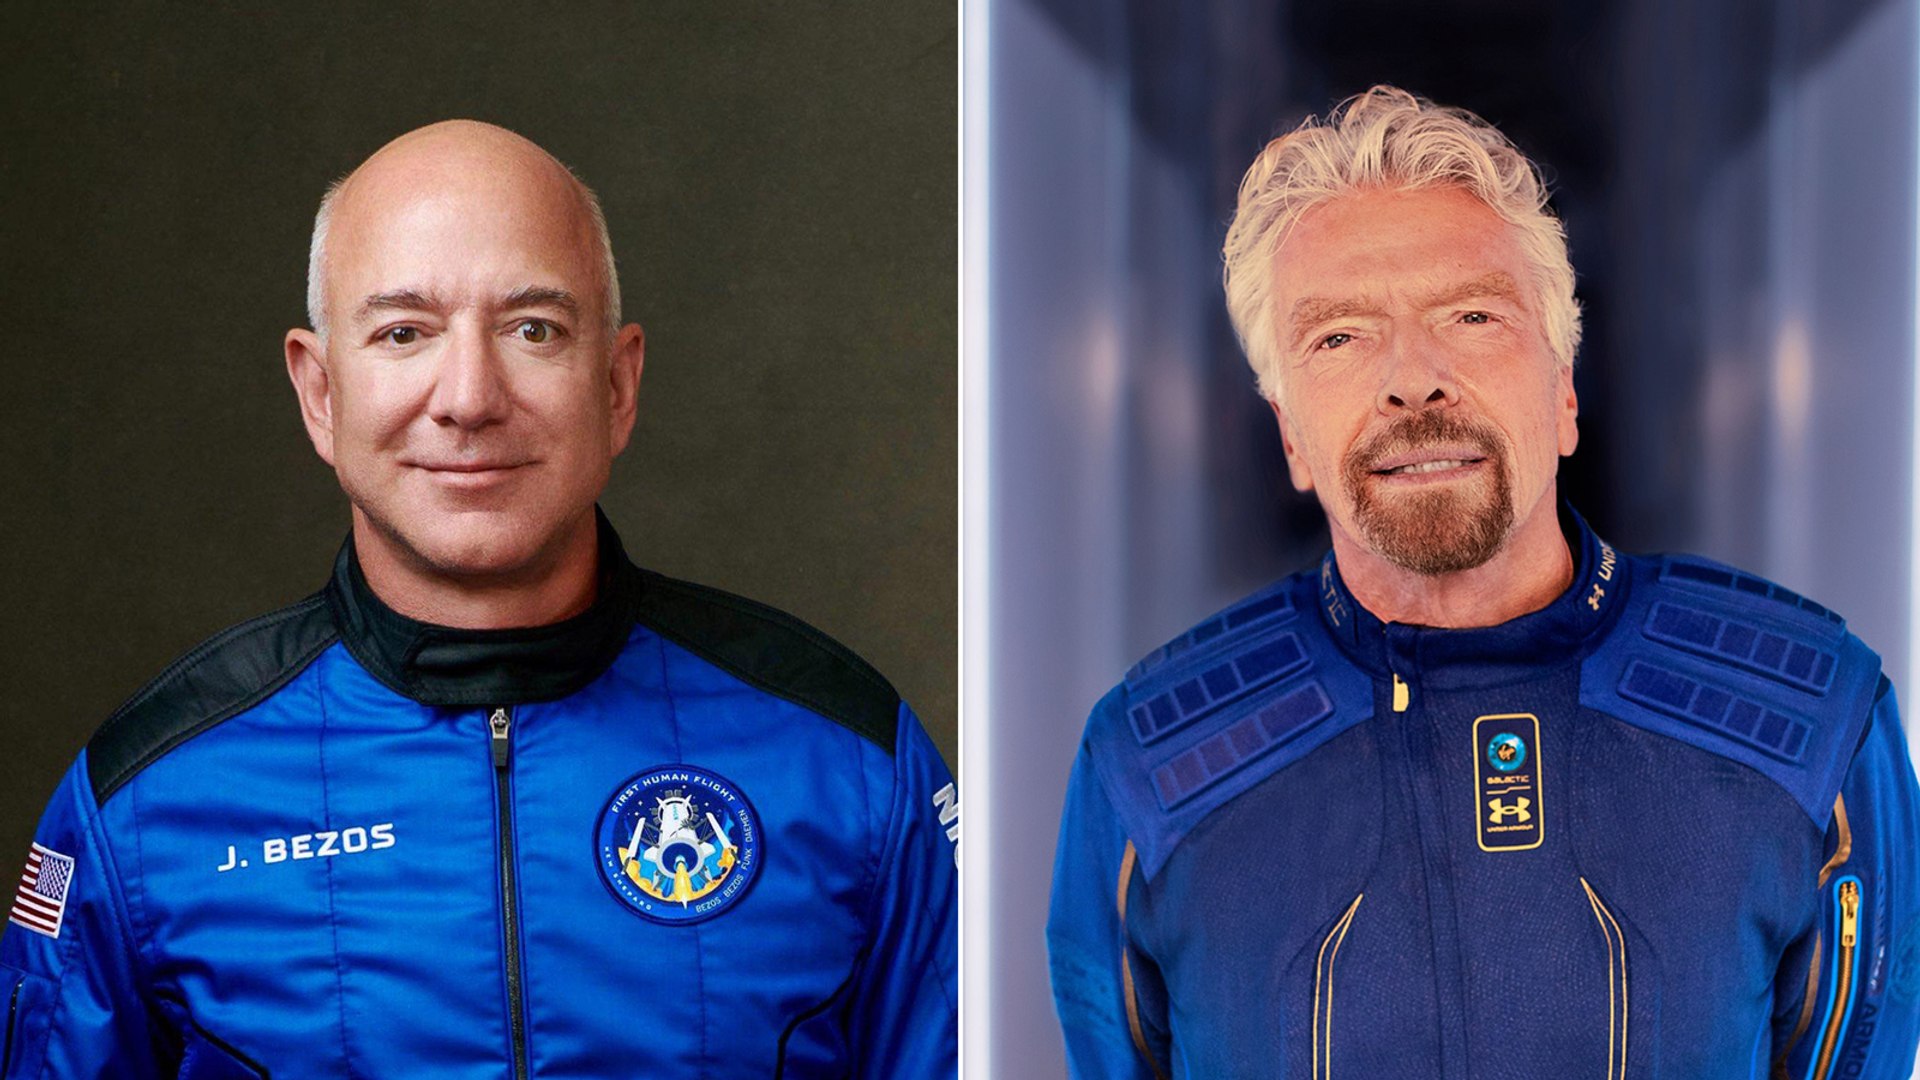 Jeff Bezos  Richard Branson just went to space and back